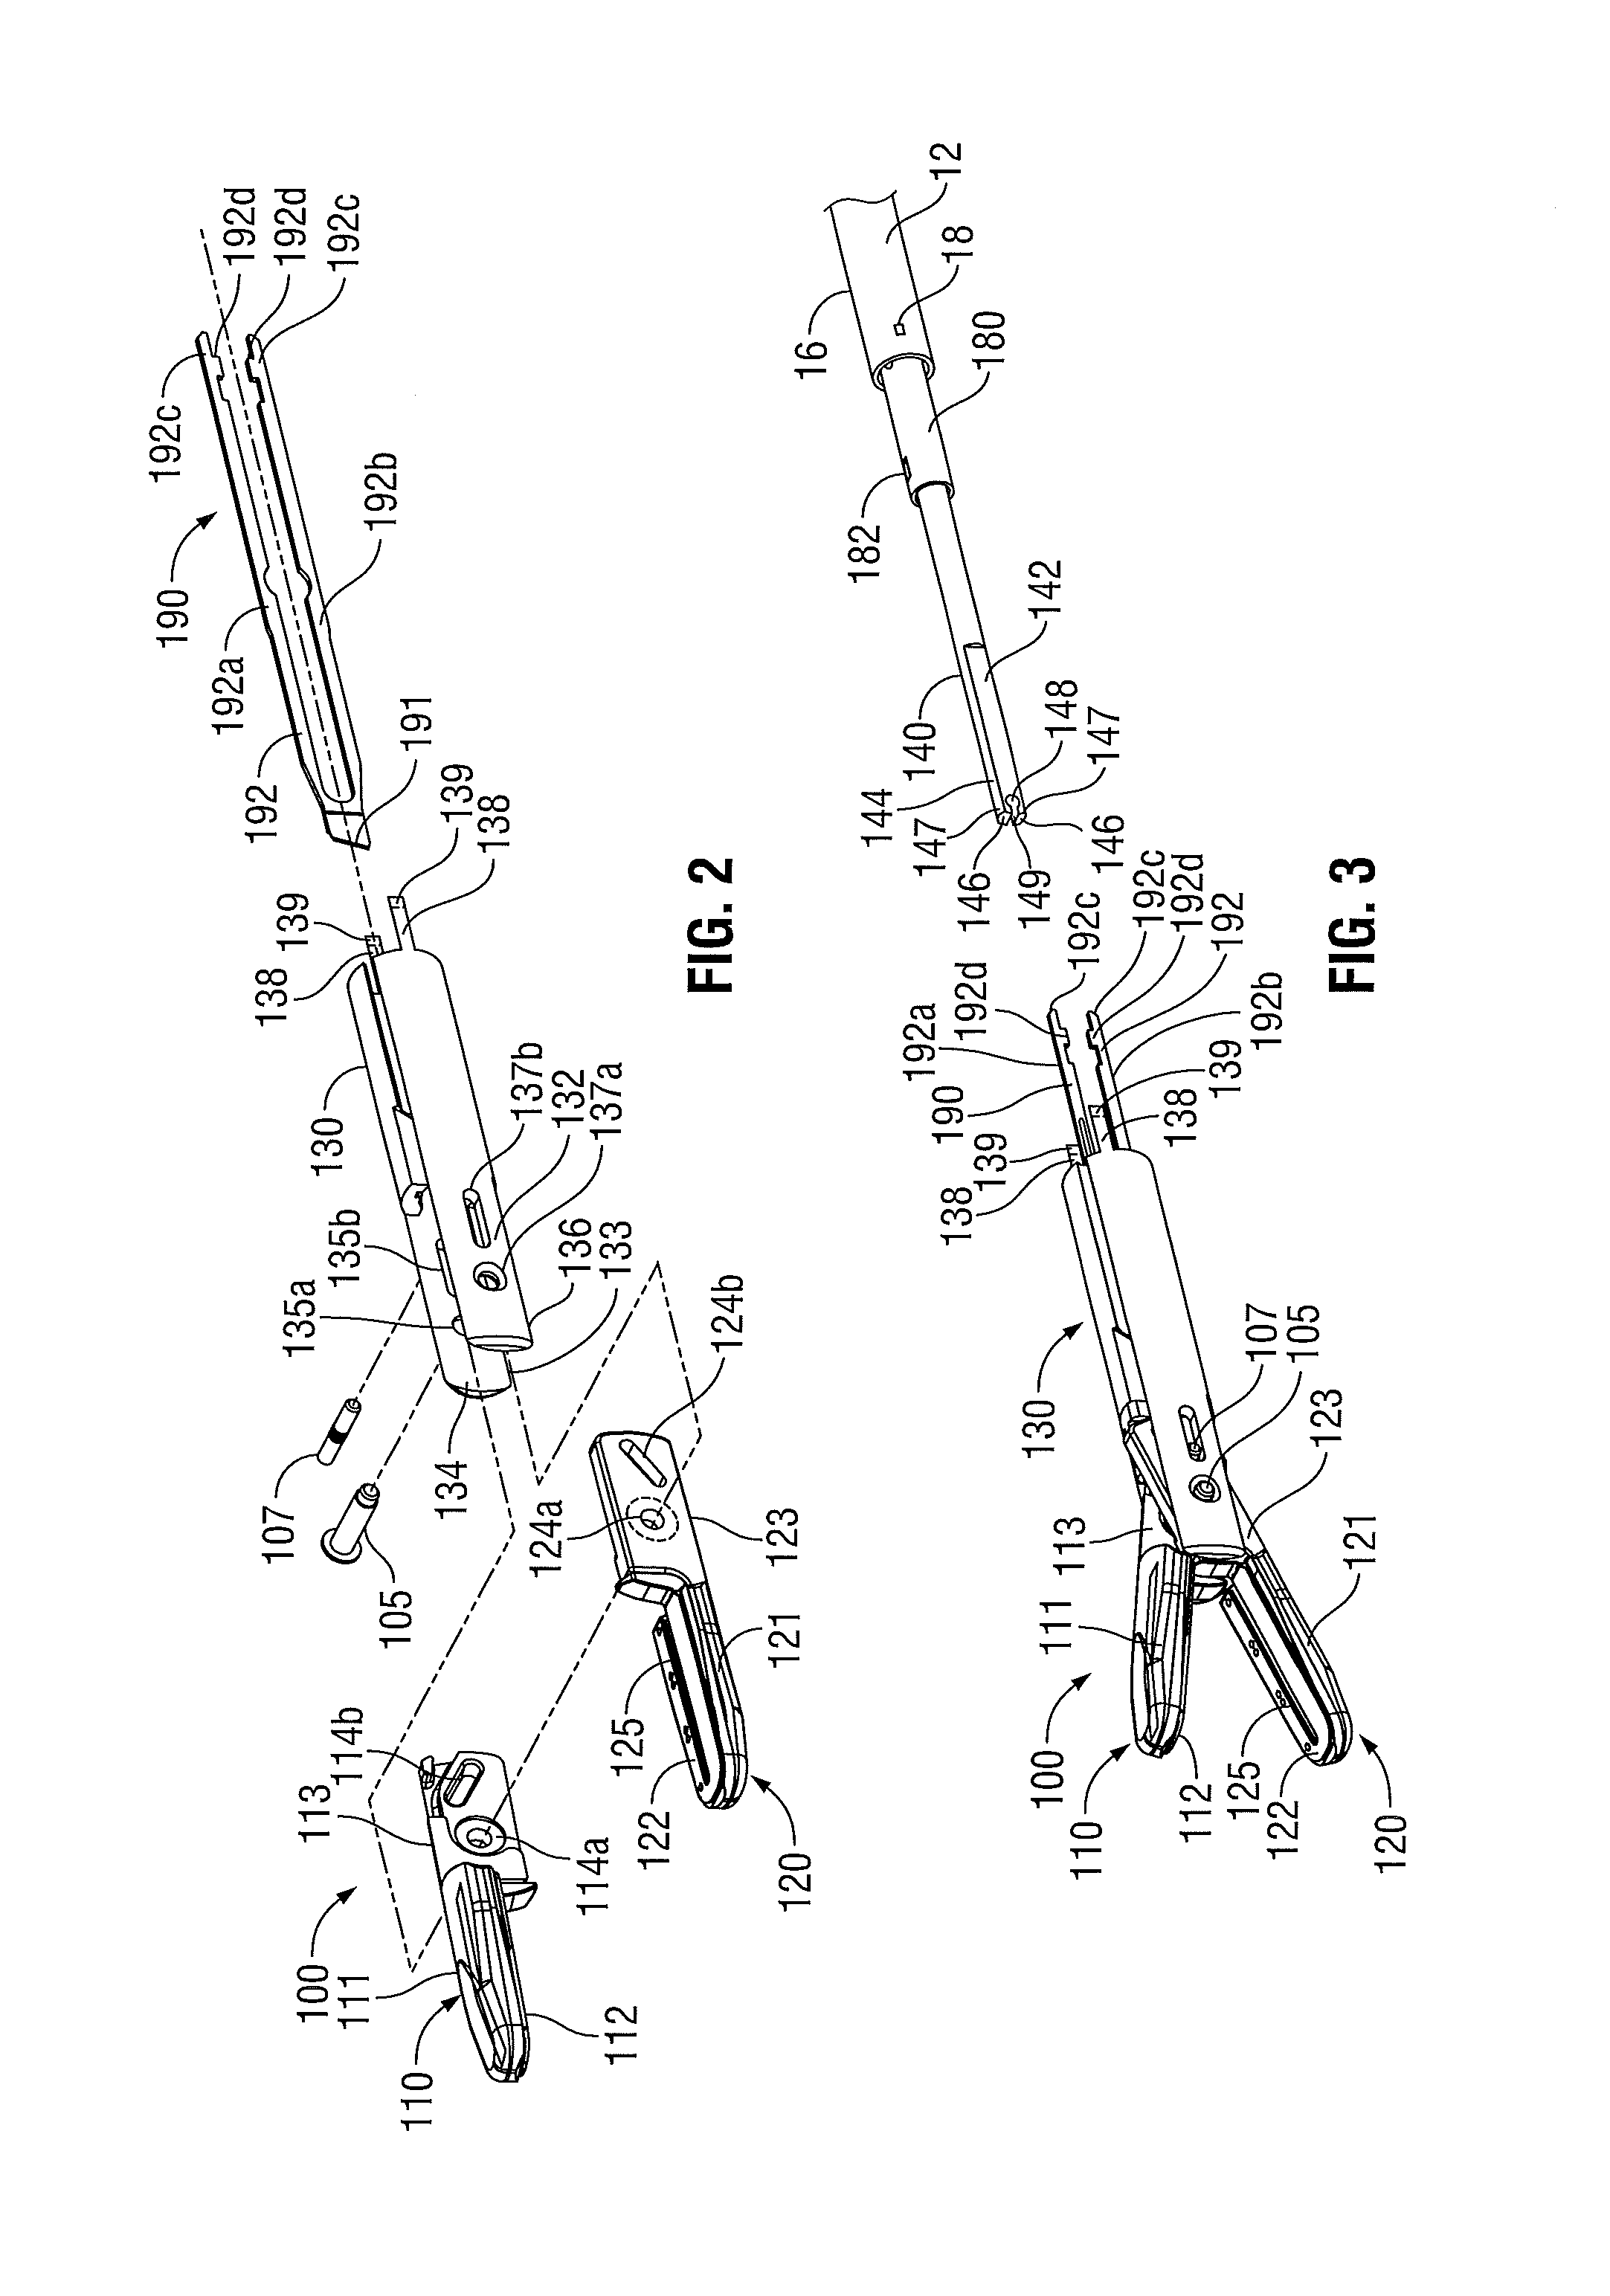 Surgical forceps including reposable end effector assemblies